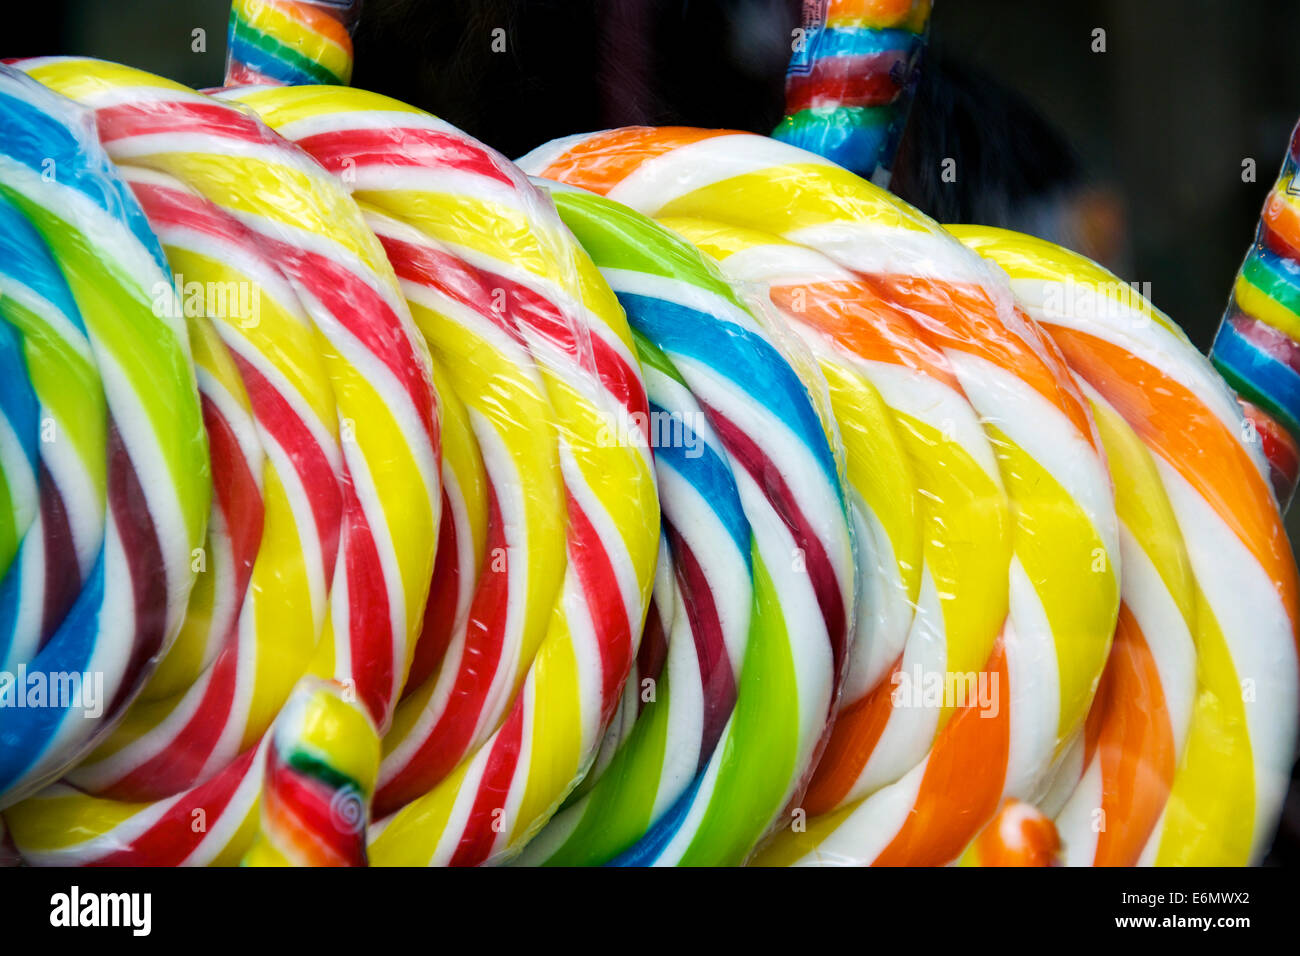 Lots of colorful lollipops on display in a shop Stock Photo